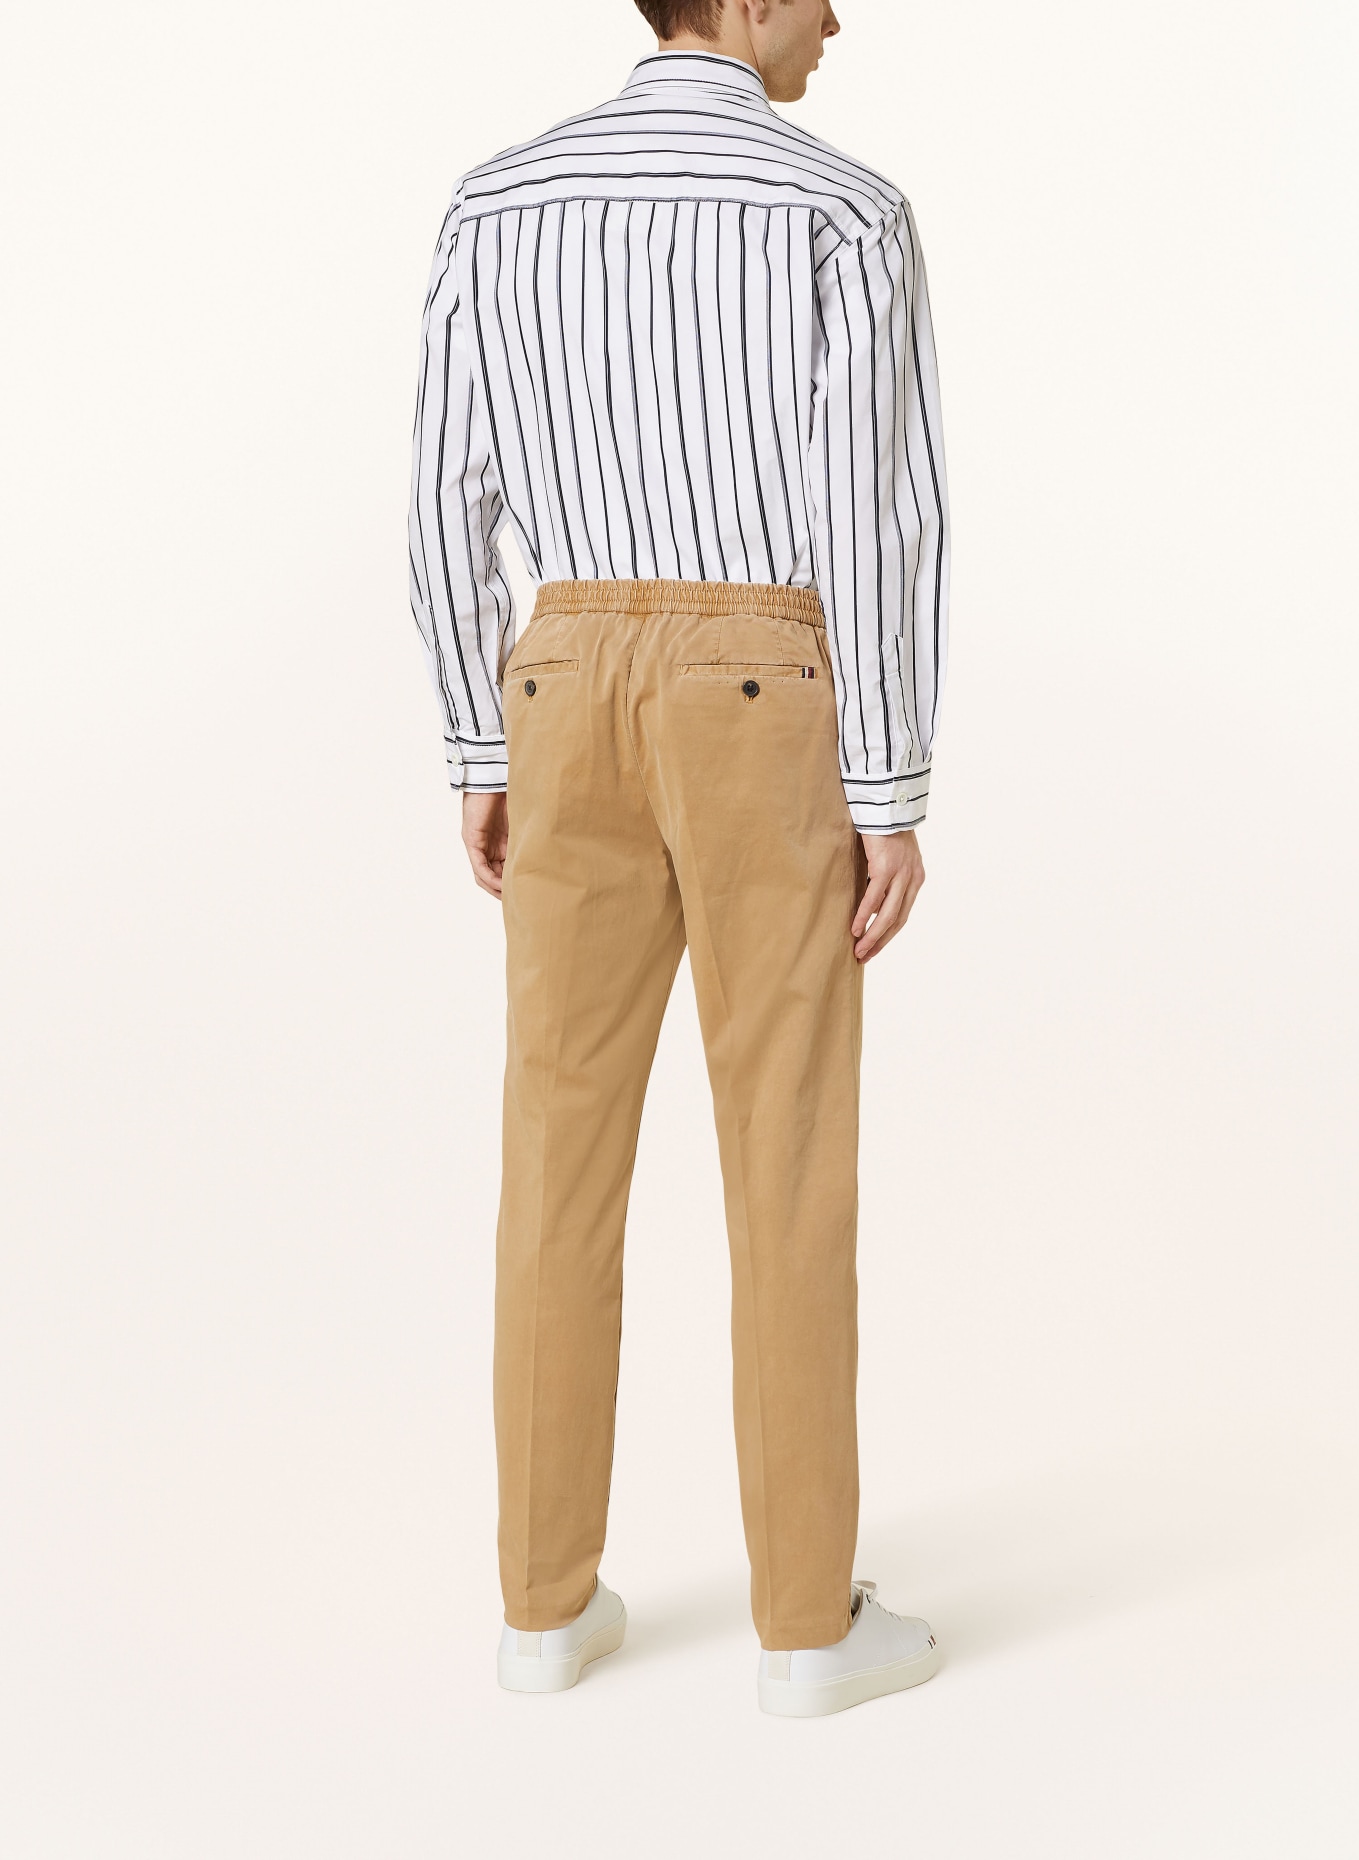 TOMMY HILFIGER Chino HARLEM Relaxed Tapered Fit, Farbe: KHAKI (Bild 3)